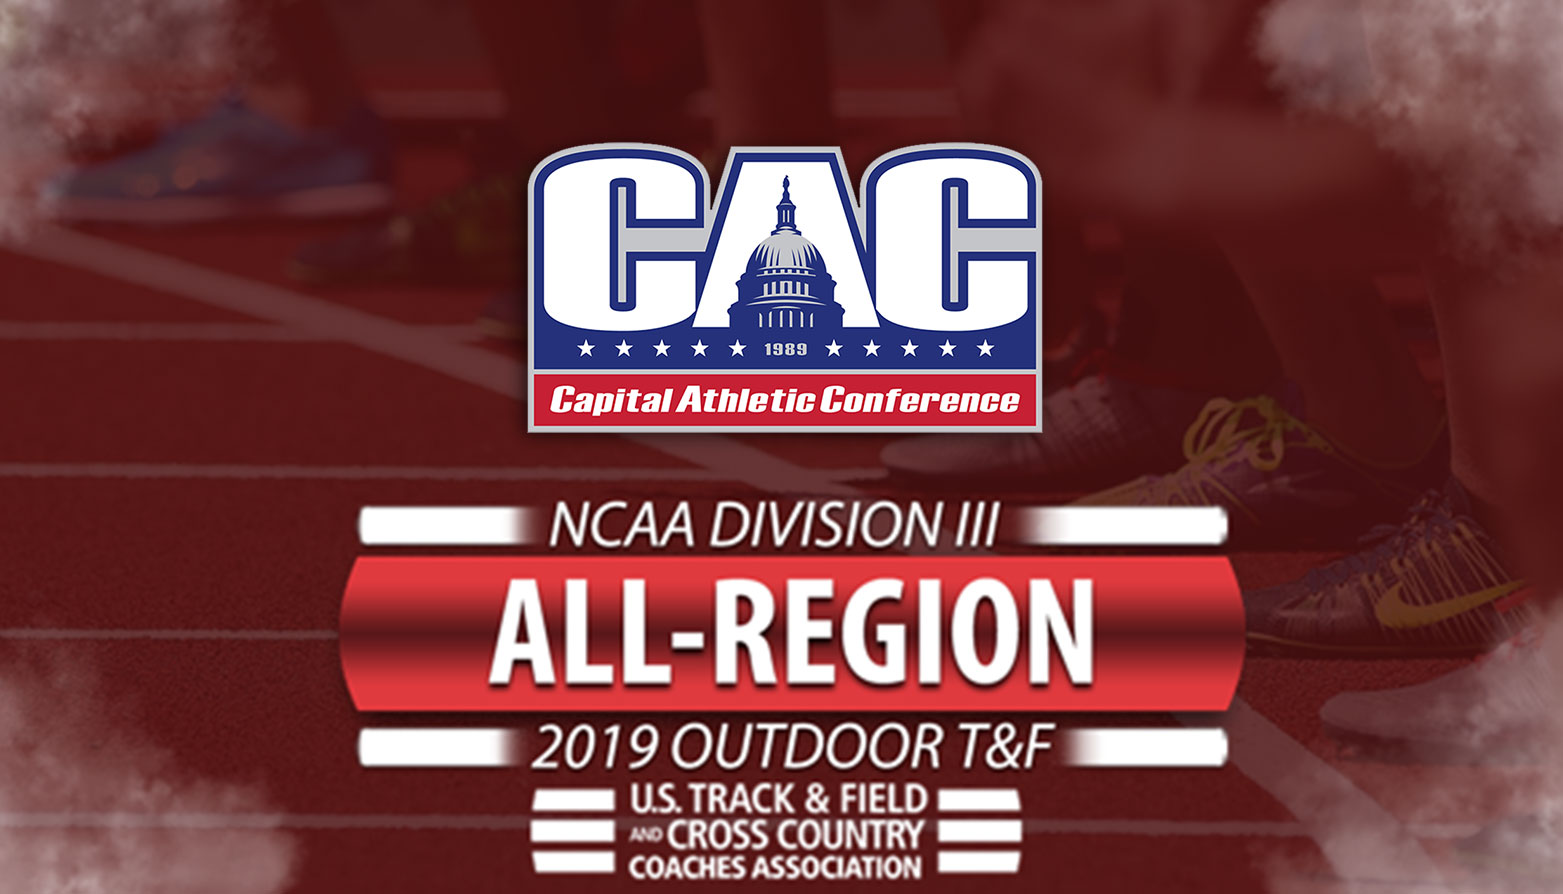 CAC Earns 59 USTFCCCA Outdoor Track & Field All-Region Honorees